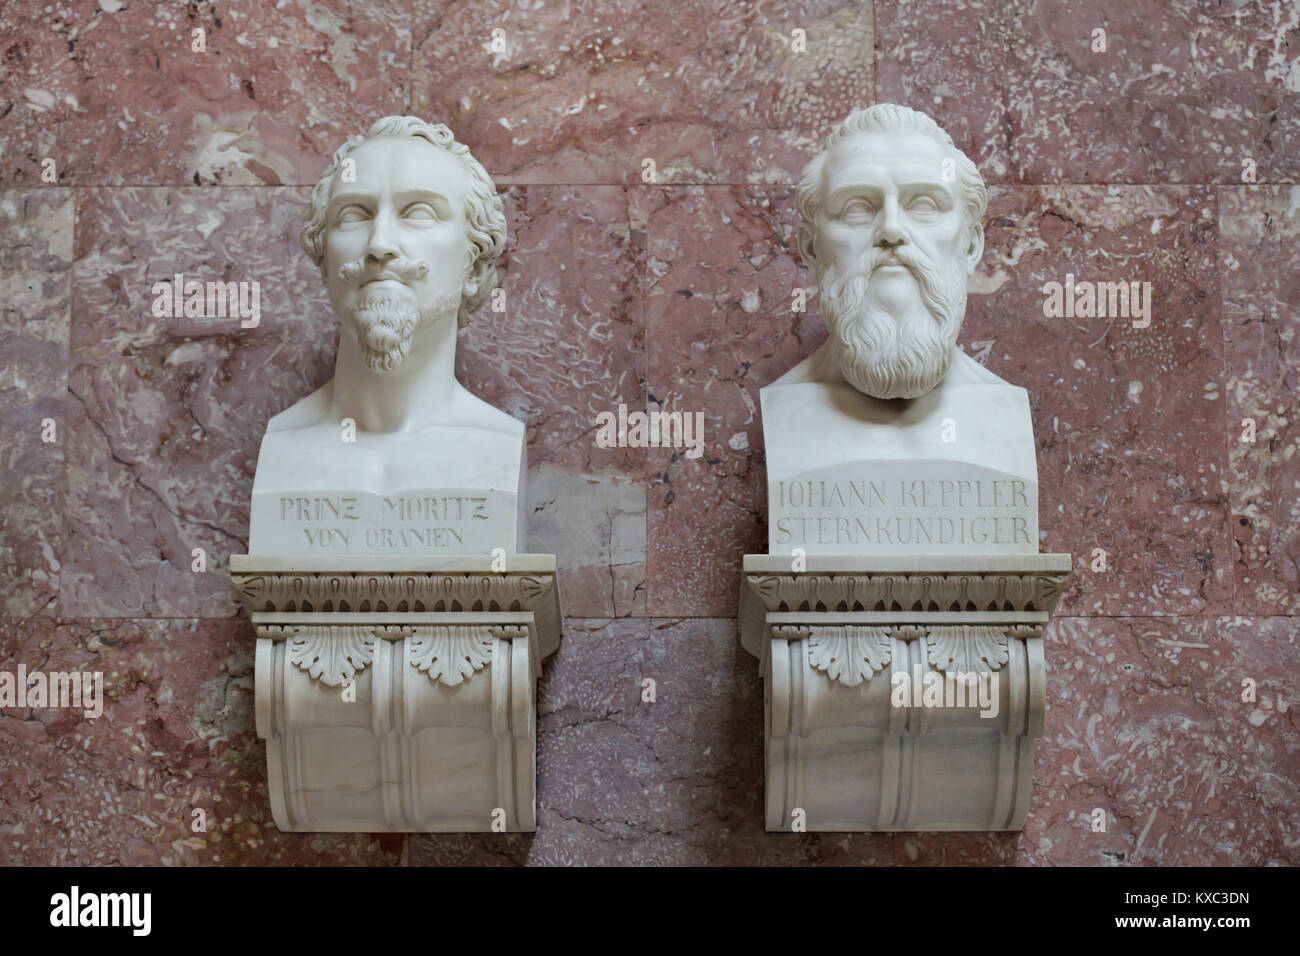 Prince Maurice of Orange (L) and German astronomer Johannes Kepler (R). Marble busts by German sculptor Christian Friedrich Tieck (1815) and by German sculptor Peter Schöpf (1842) on display in the hall of fame in the Walhalla Memorial near Regensburg in Bavaria, Germany. Stock Photo